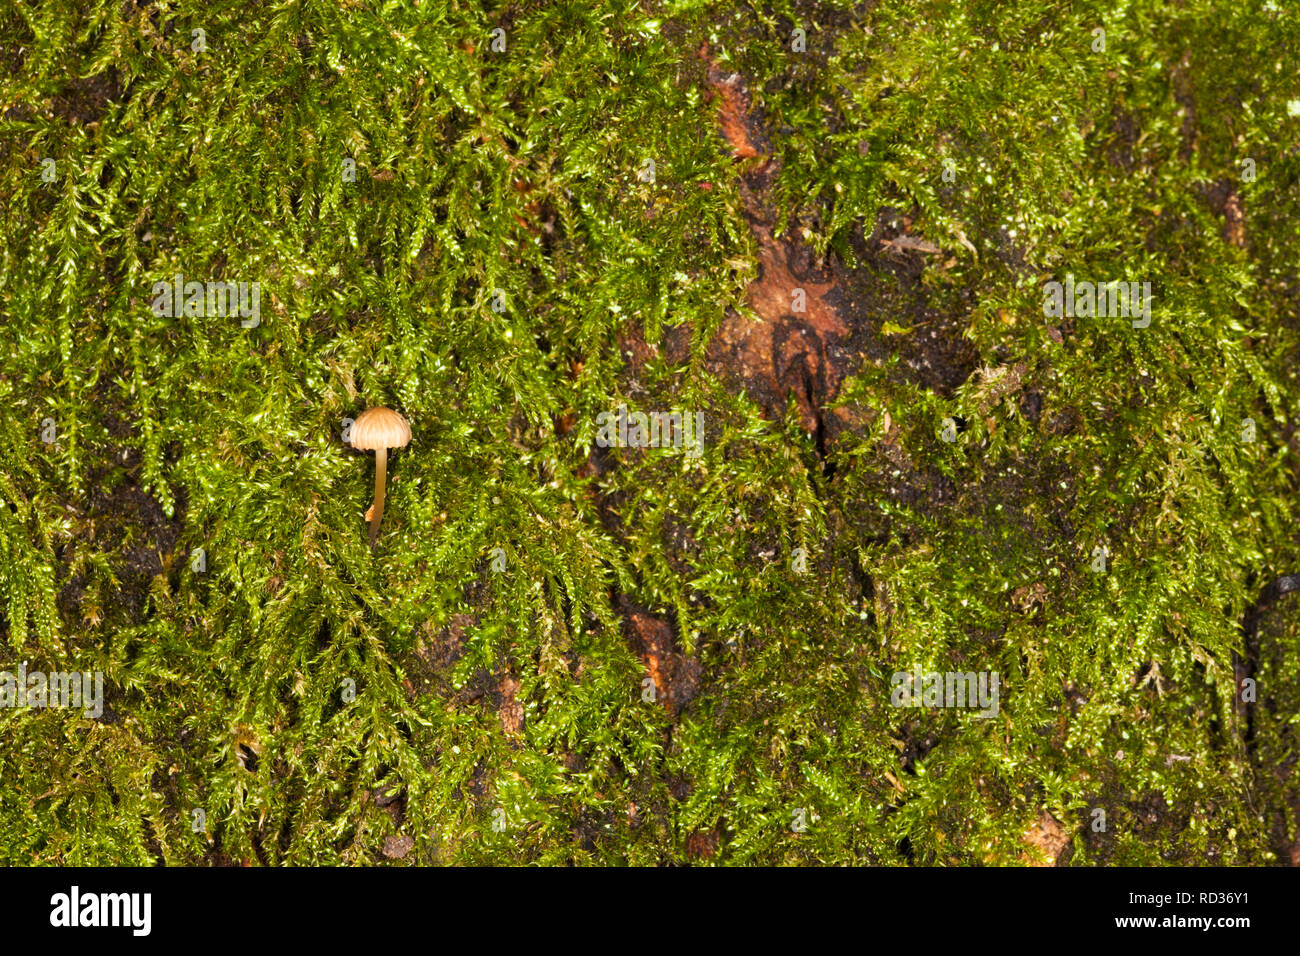 Very small fruiting body or mushroom (believed Mycena sp.) among a forest of moss on the trunk of a tree, Kent, UK, winter. Stock Photo